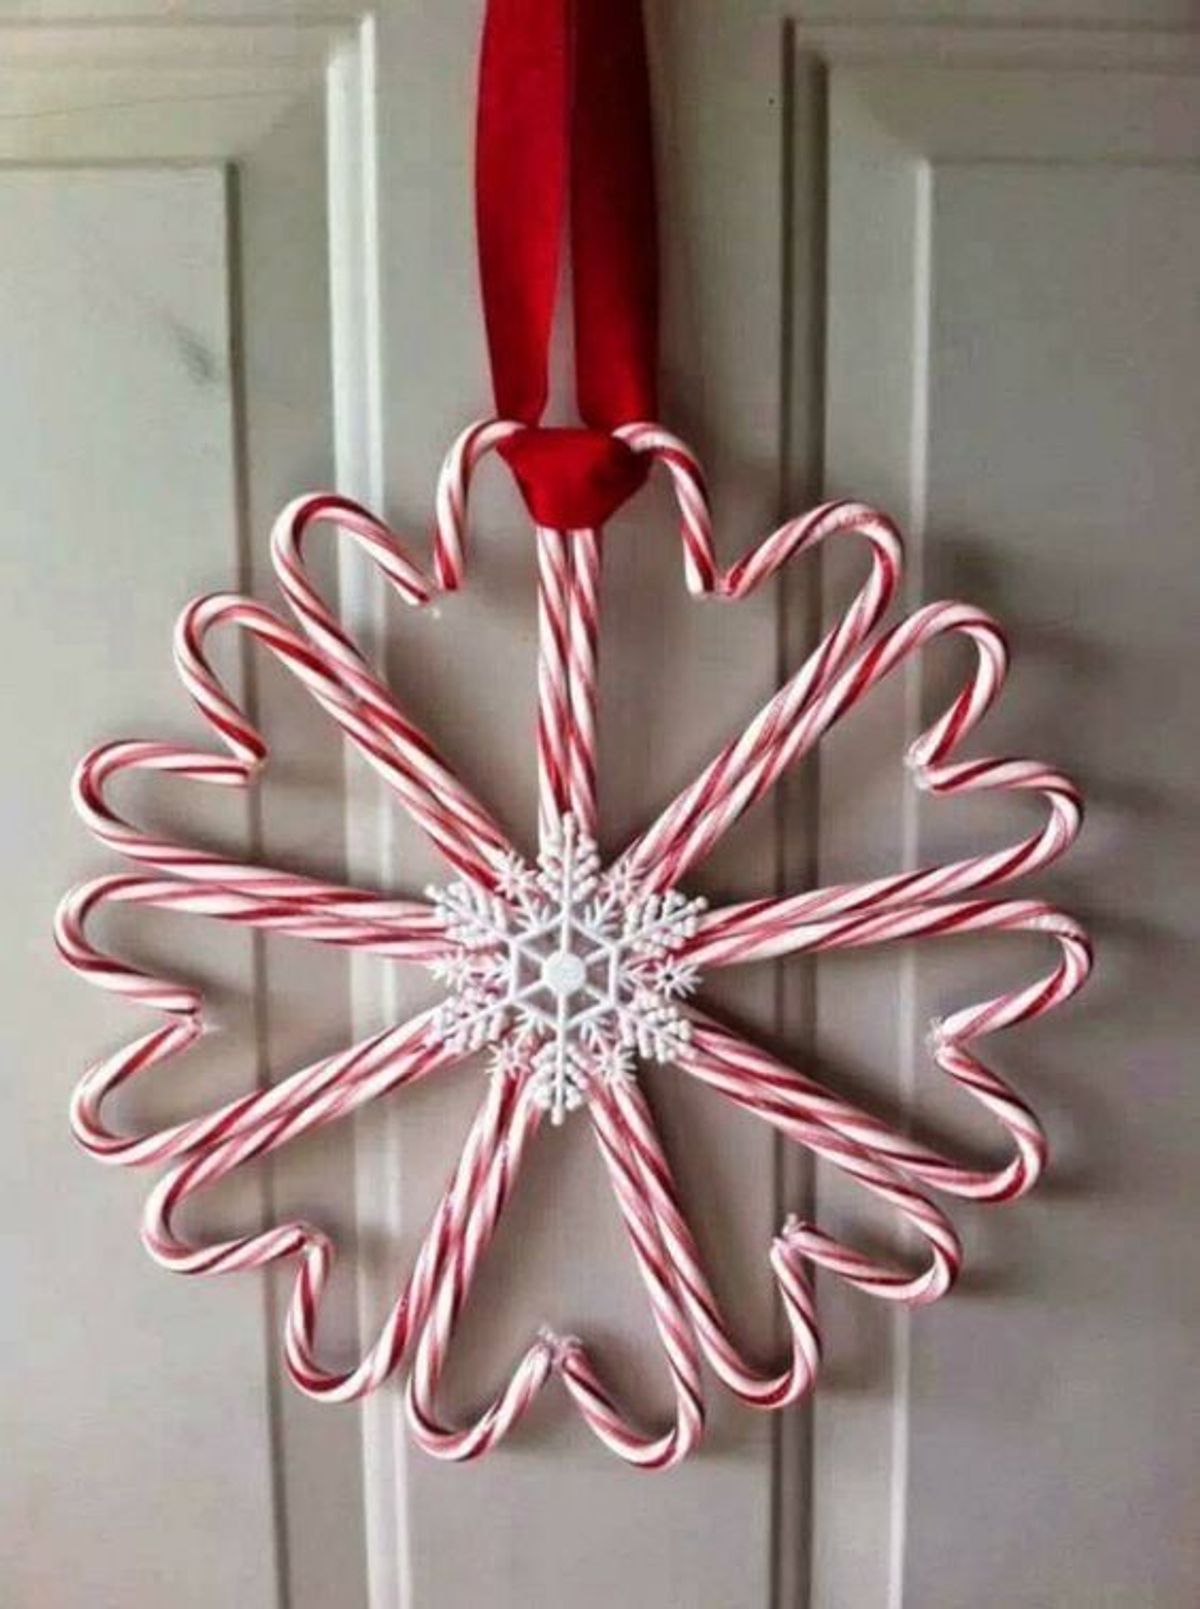 8 Pinterest Christmas Decorations You Need To Do This Year